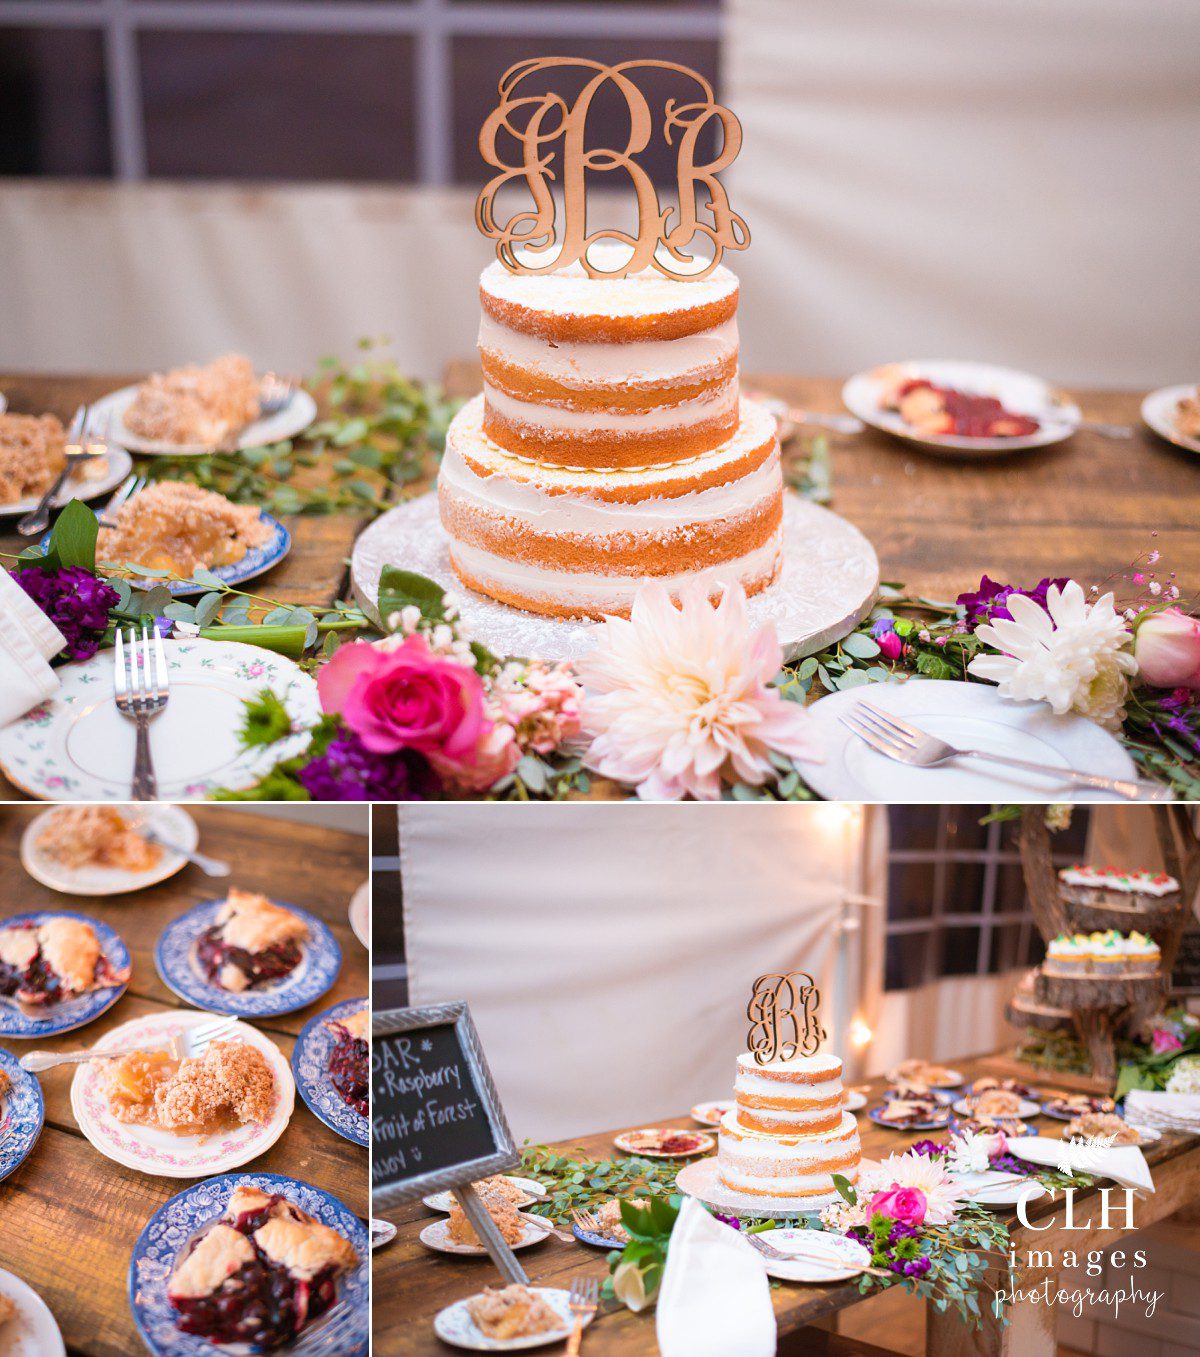 CLH images Photography - Adirondack Weddings - Adirondack Photographer - Rustic Wedding - Barn Wedding - Burlap and Beams Wedding - Jessica and Ryan (145)